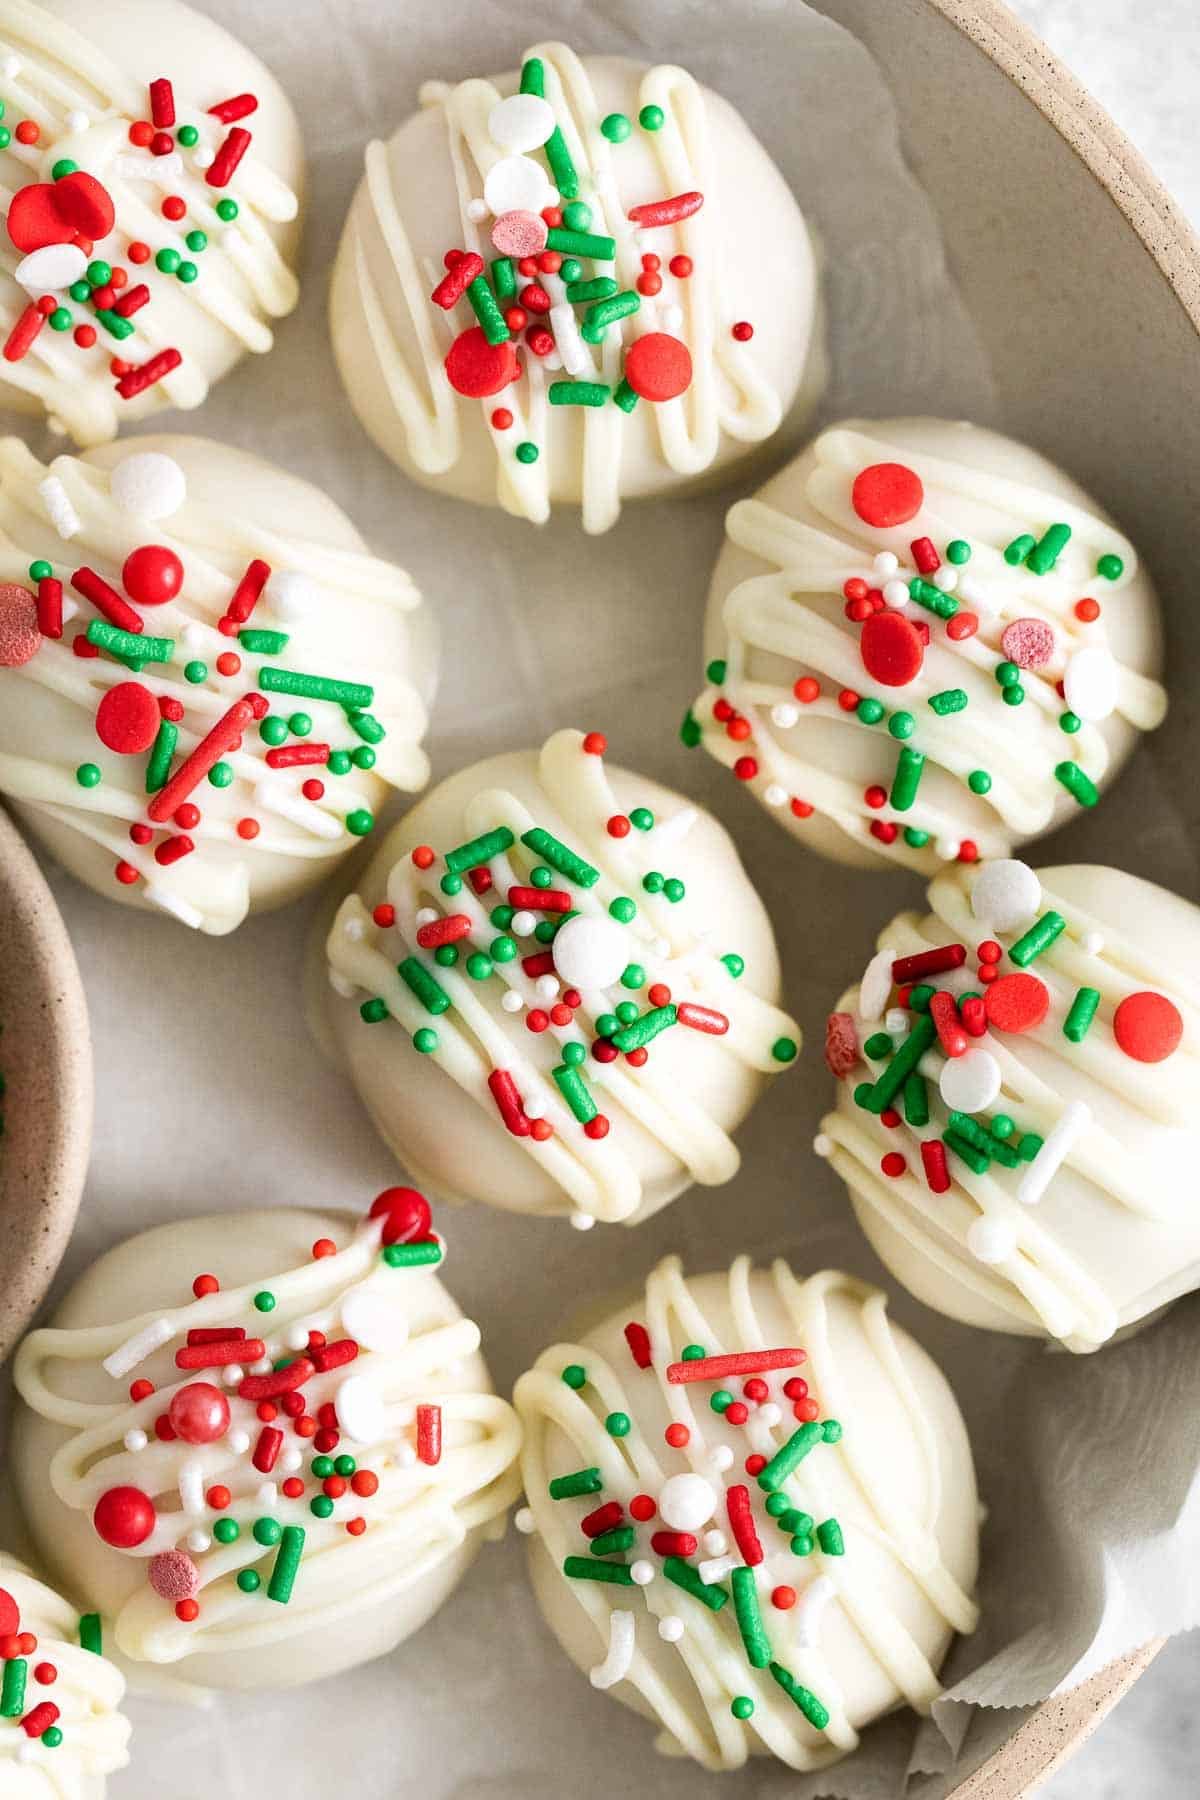 closeup of seven white chocolate covered peanut butter balls with red and green sprinkles.